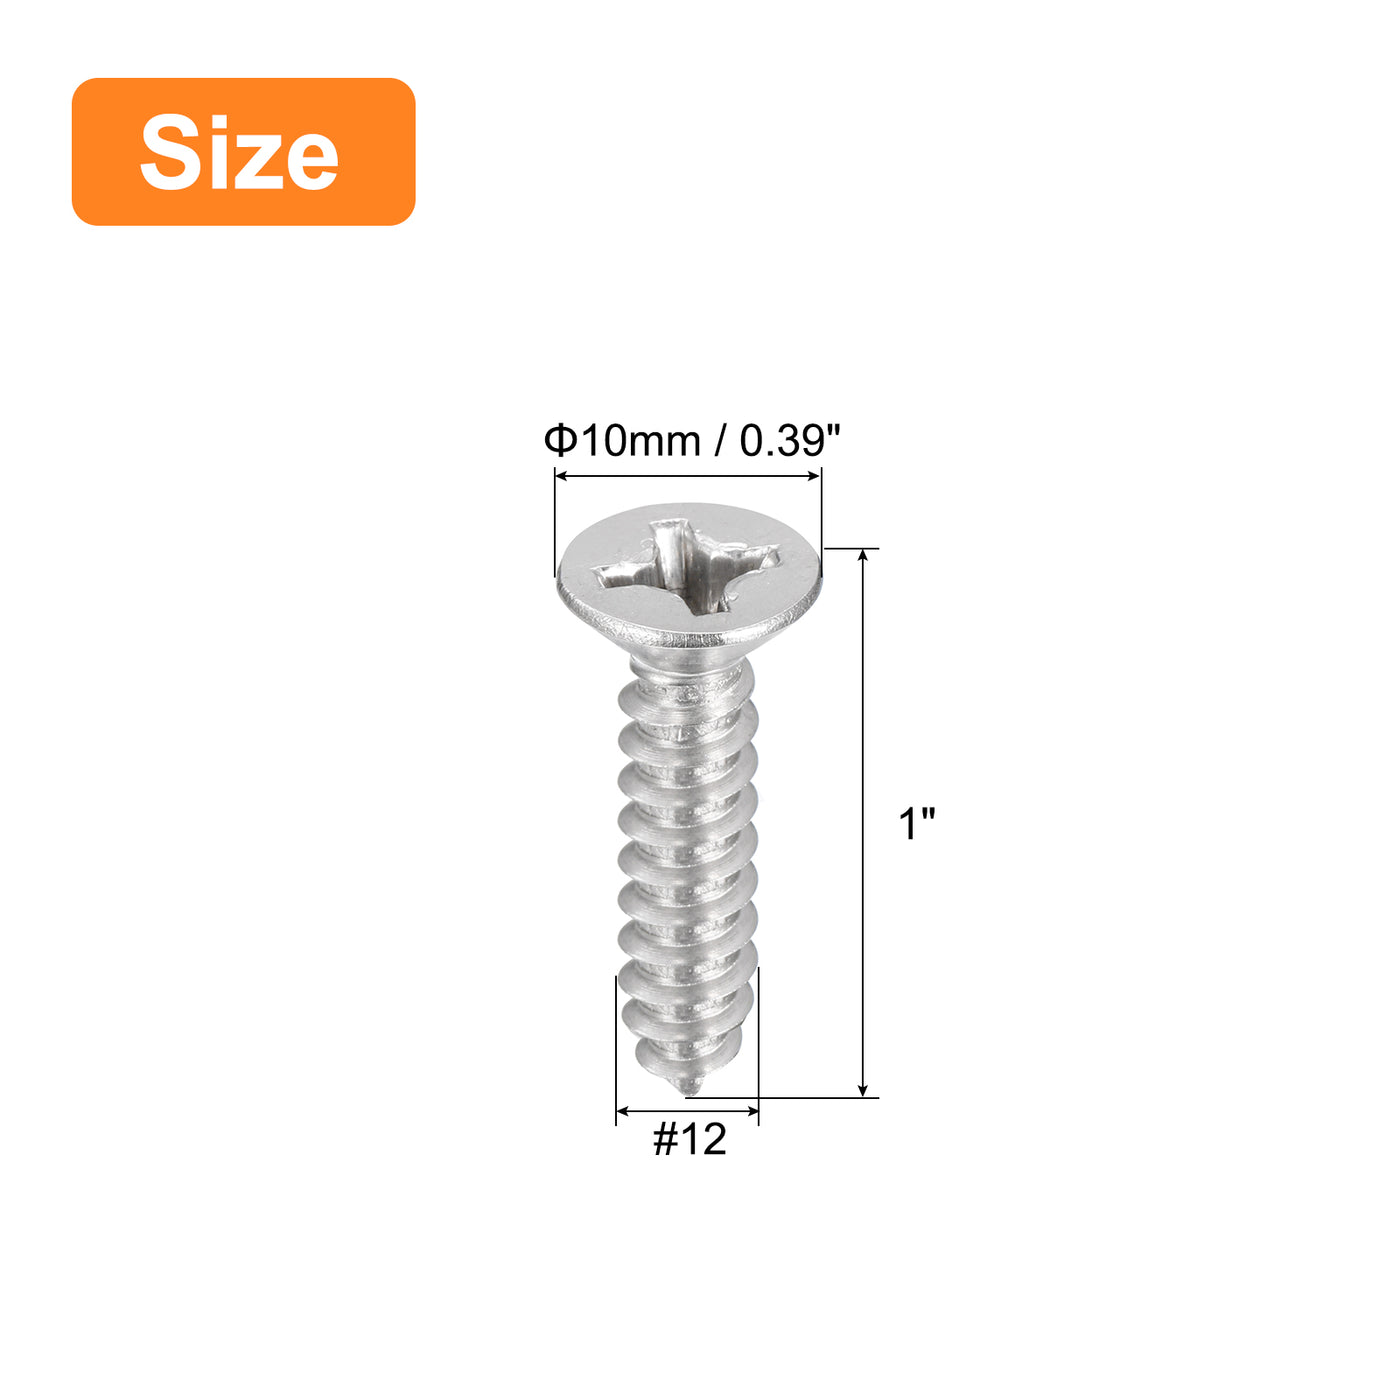 uxcell Uxcell #12x1" Wood Screws, 50pcs Phillips Self Tapping Screws 304 Stainless Steel